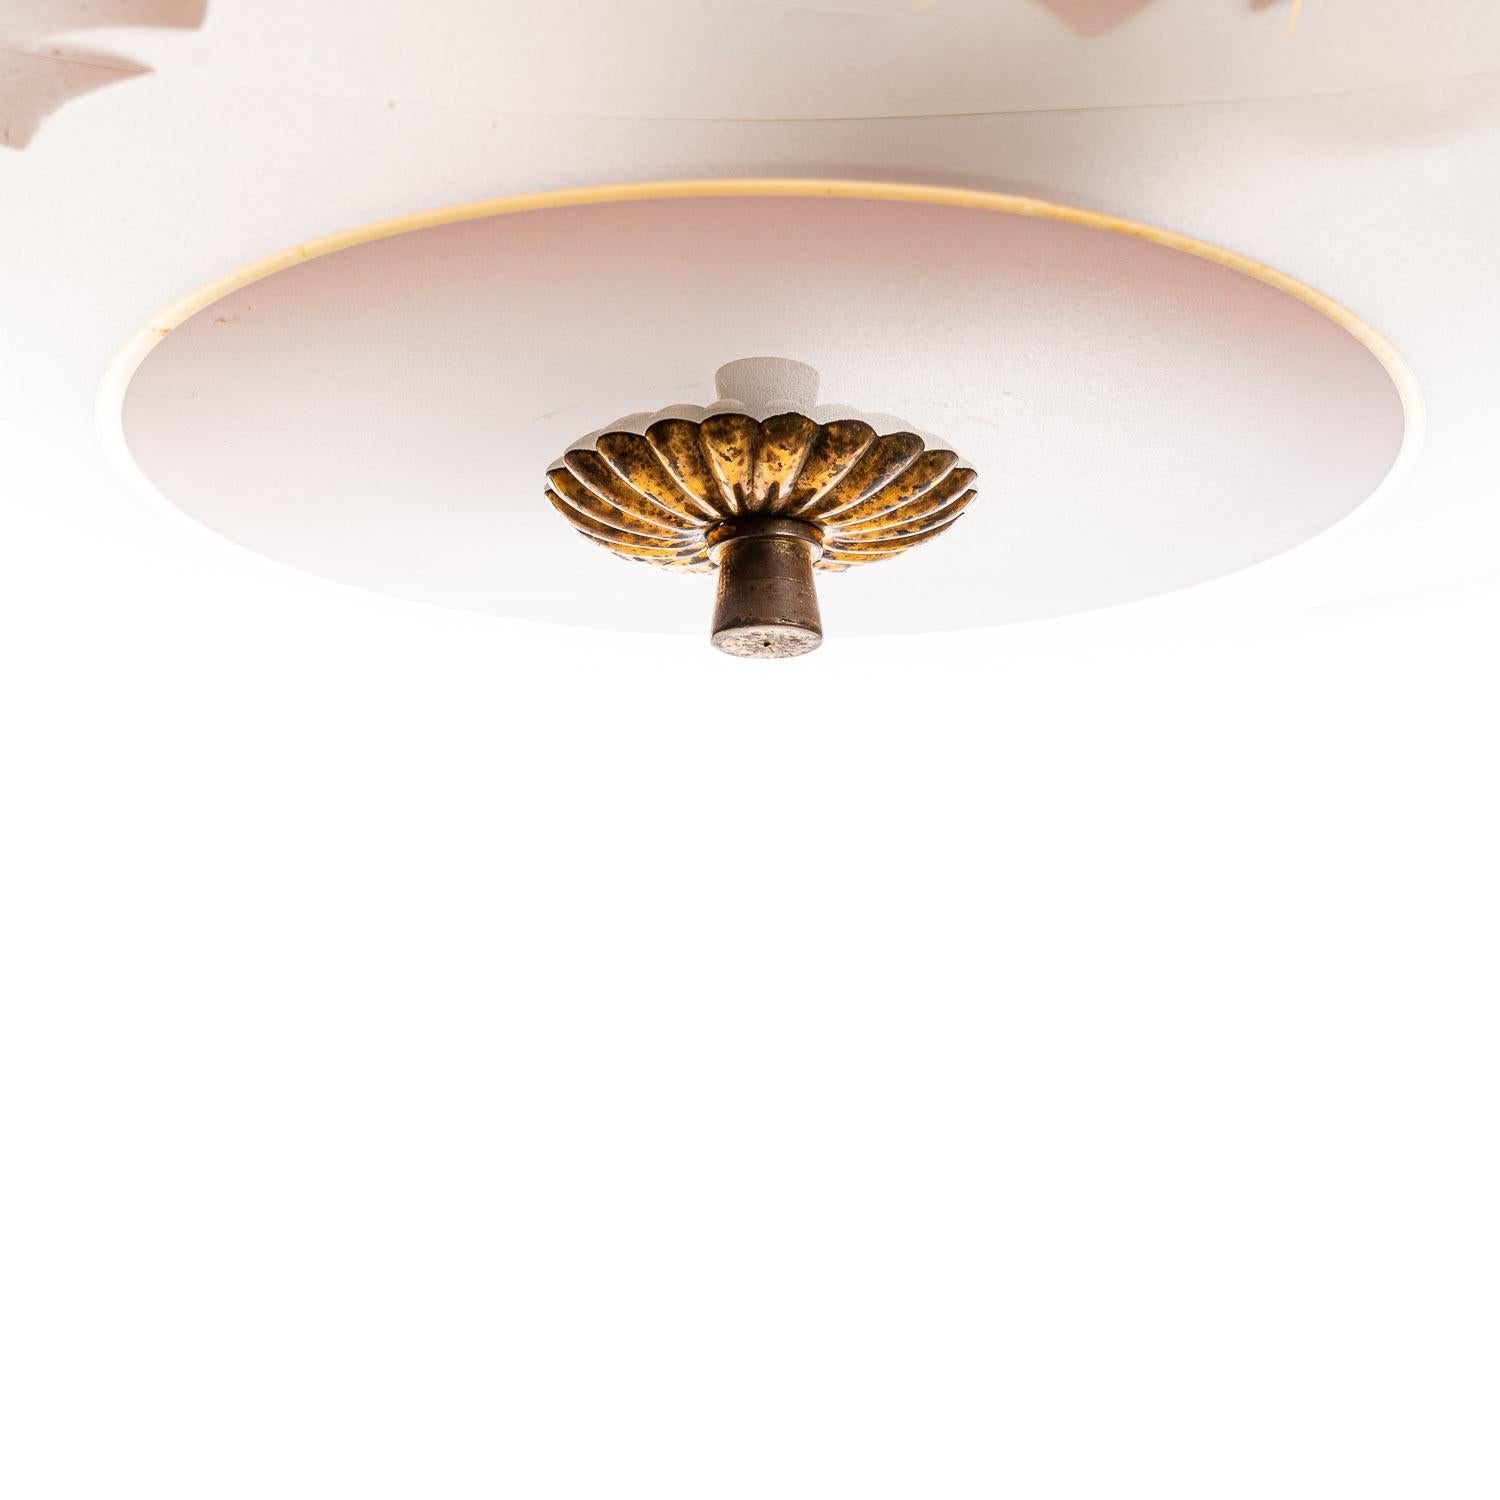 This elegant piece consisting of a brass frame and 2 unique frosted and satin glass reflector/saucers. 
The lower round curved glass reflector with a colorful pink floral motif mounts below a round satin glass reflector. Finished off with a brass